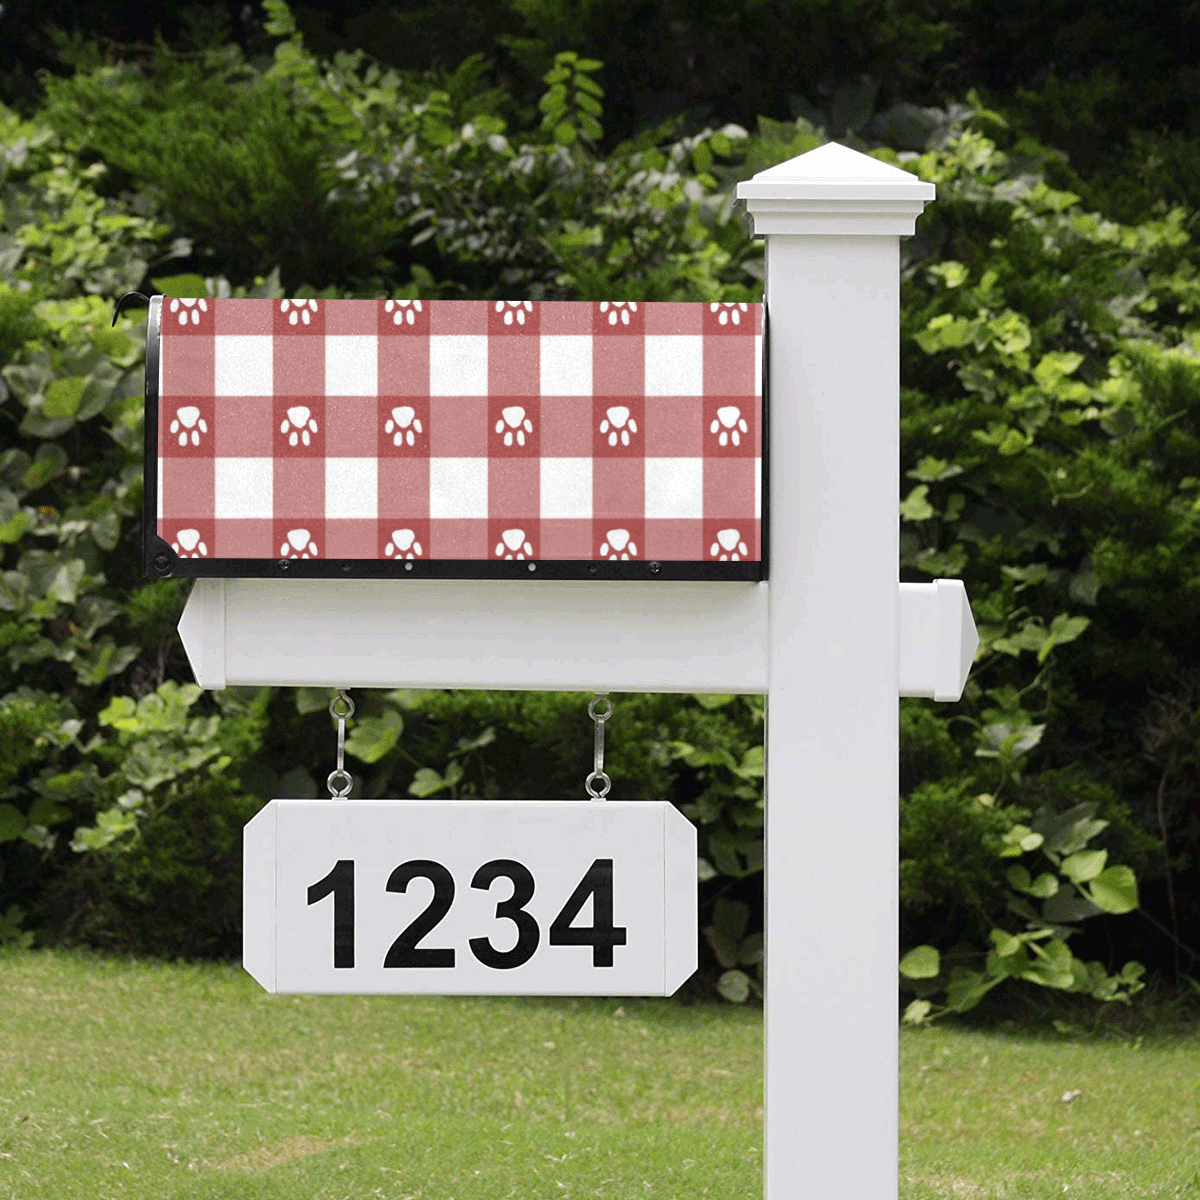 Plaid and paws Mailbox Cover